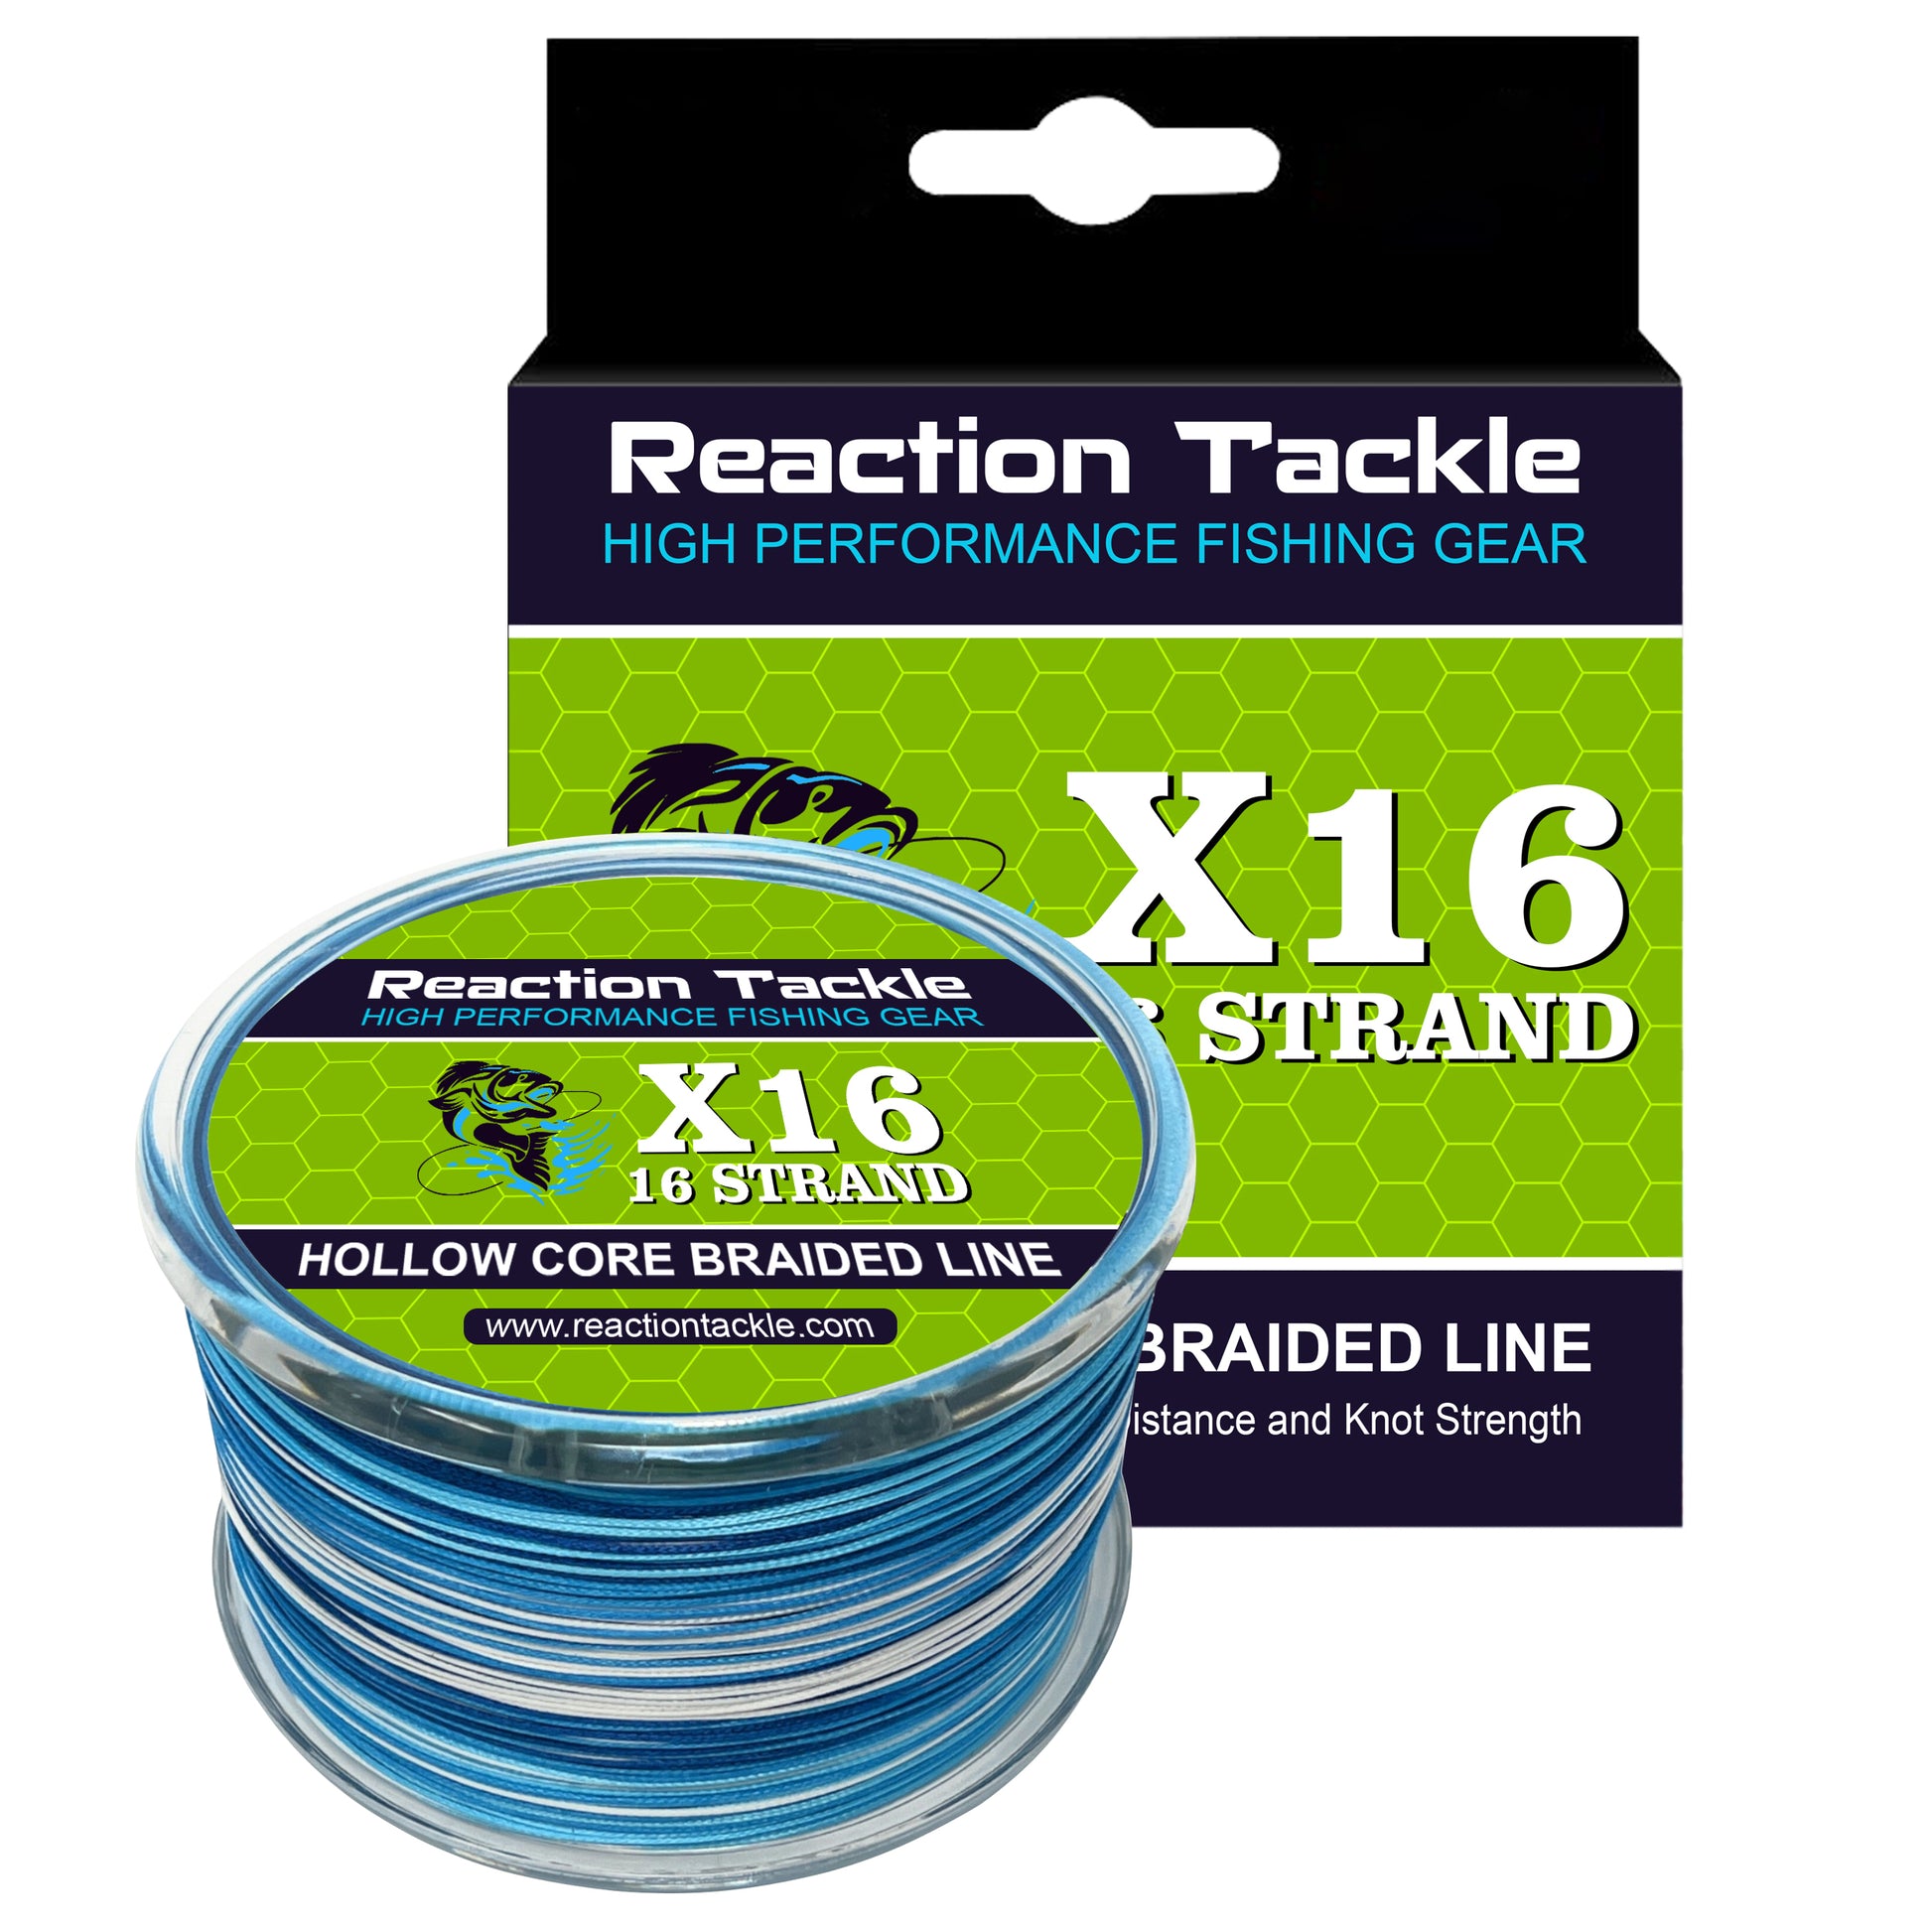 White Braided Fishing Lines & Leaders 100 lb Line Weight Fishing for sale